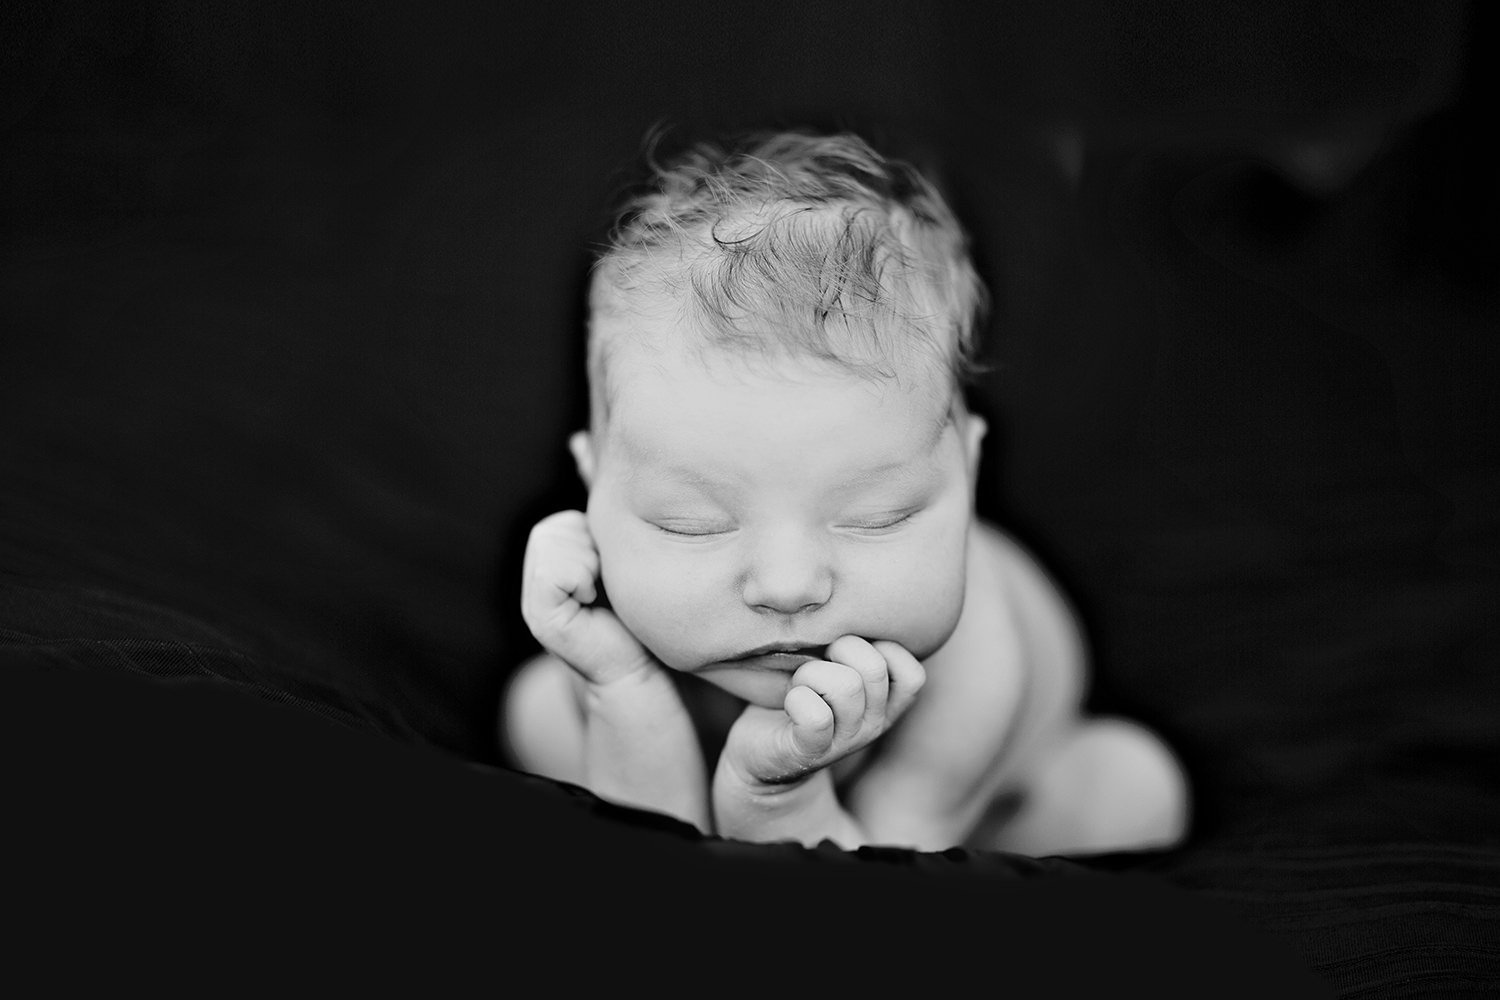 san diego wedding photographer | black and white photo with newborn sleeping with arms holding head up